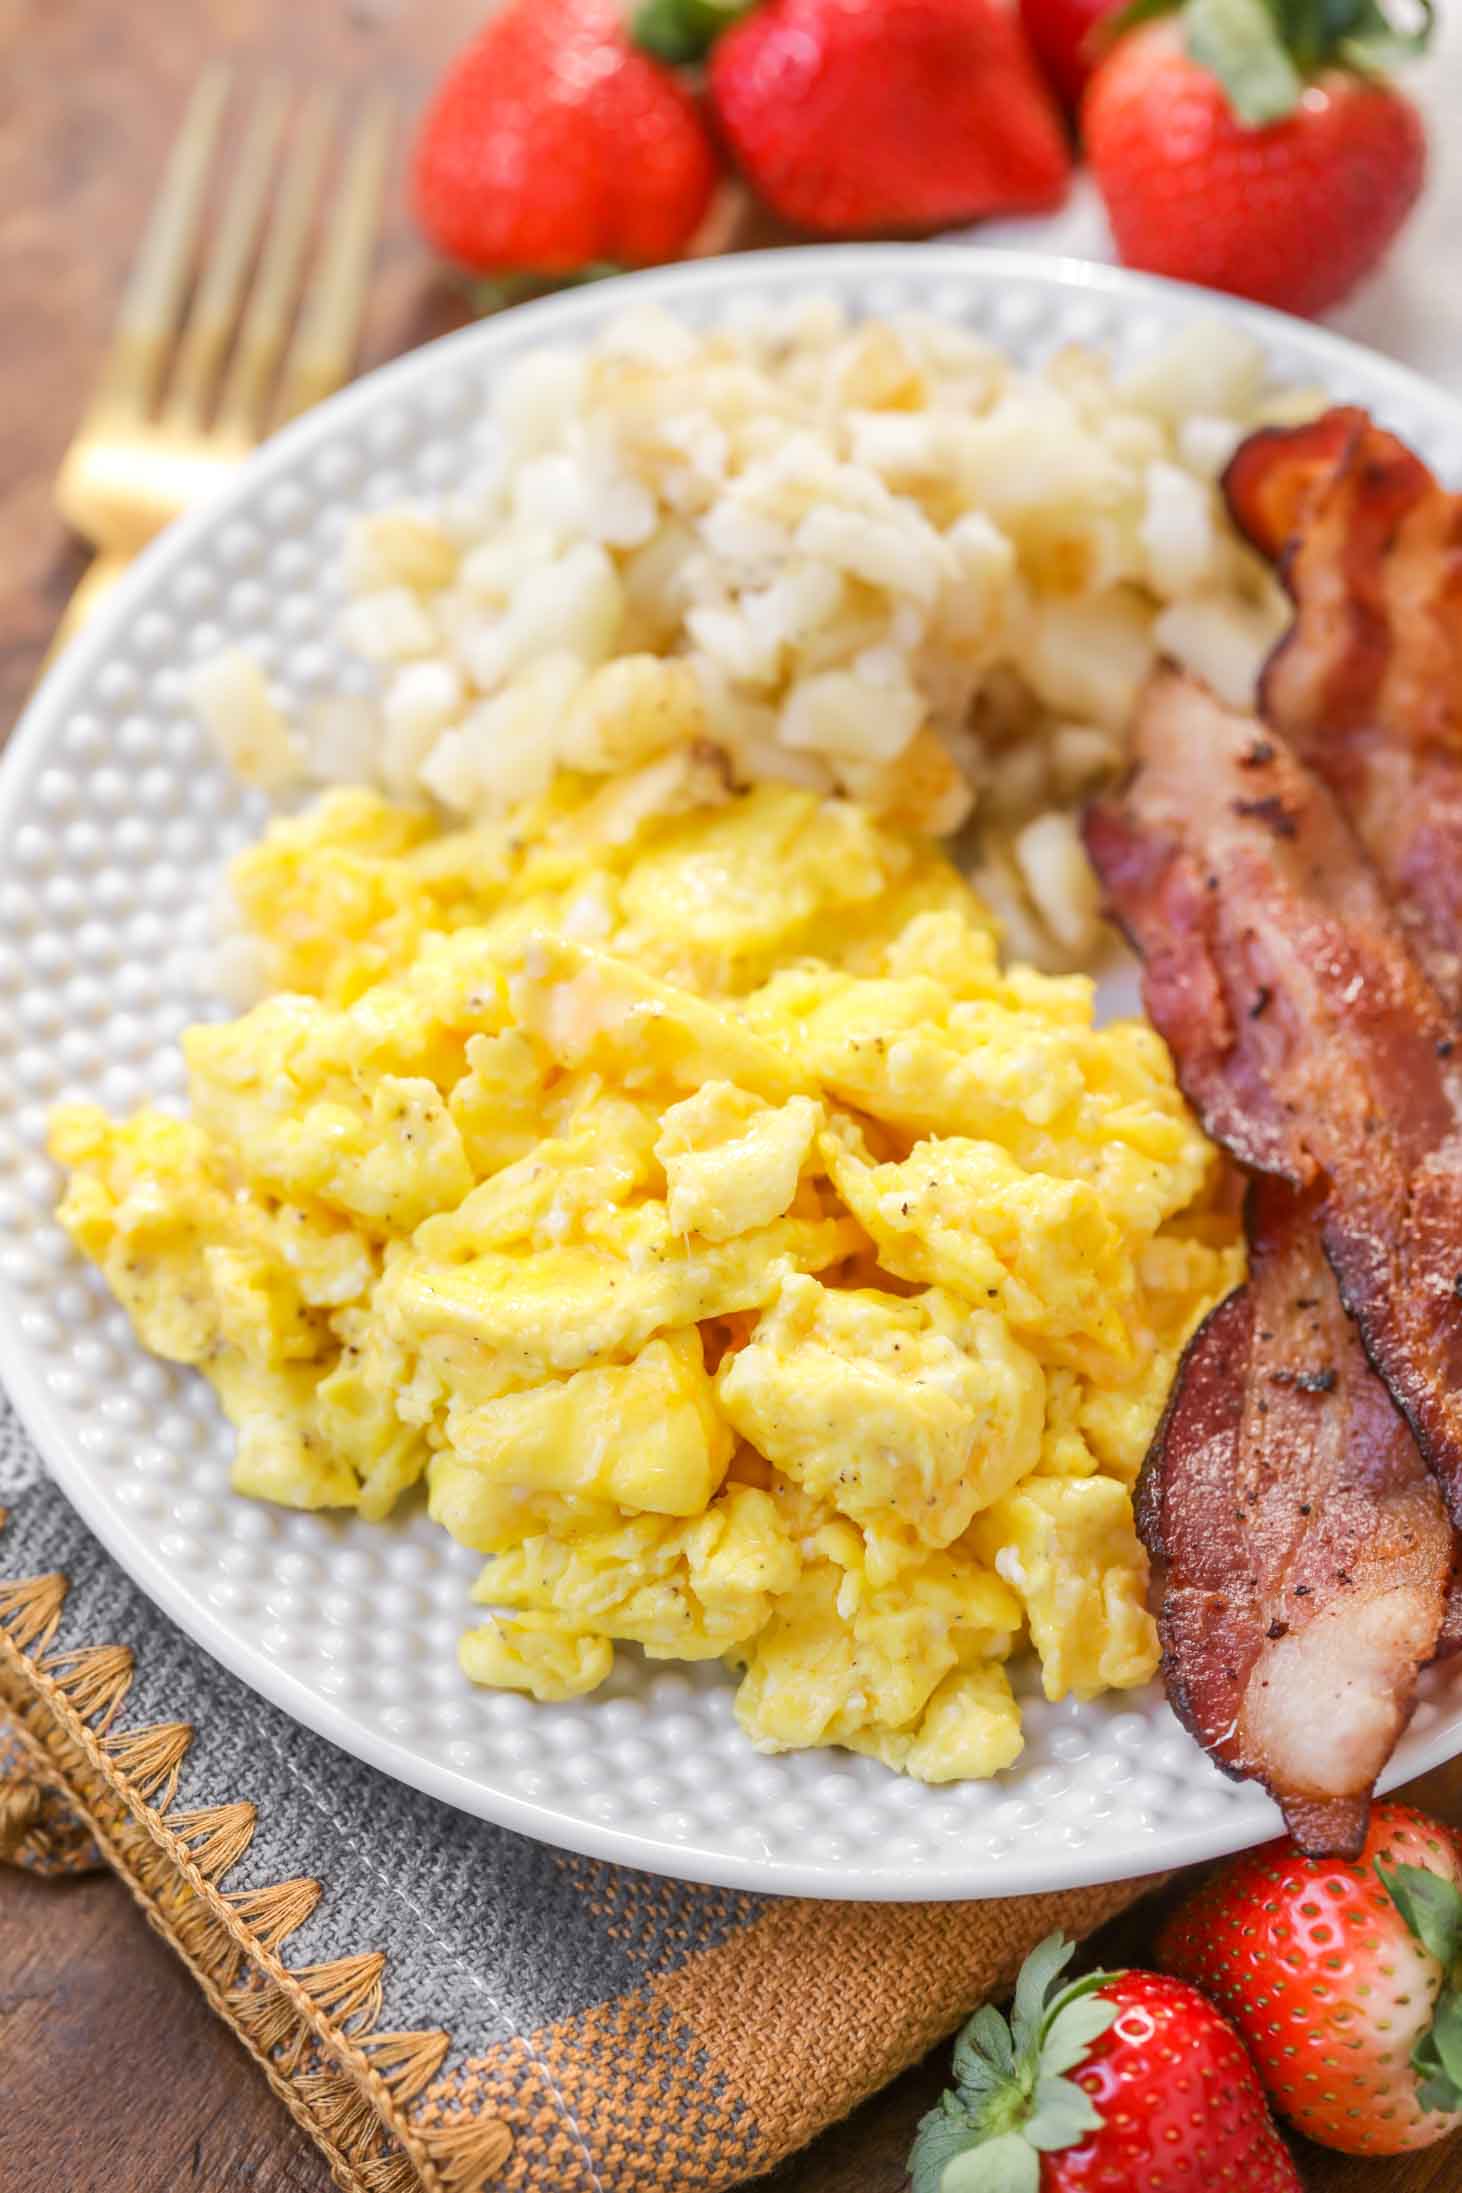 Christmas breakfast ideas - a plate filled with eggs, hashbrowns, and bacon.